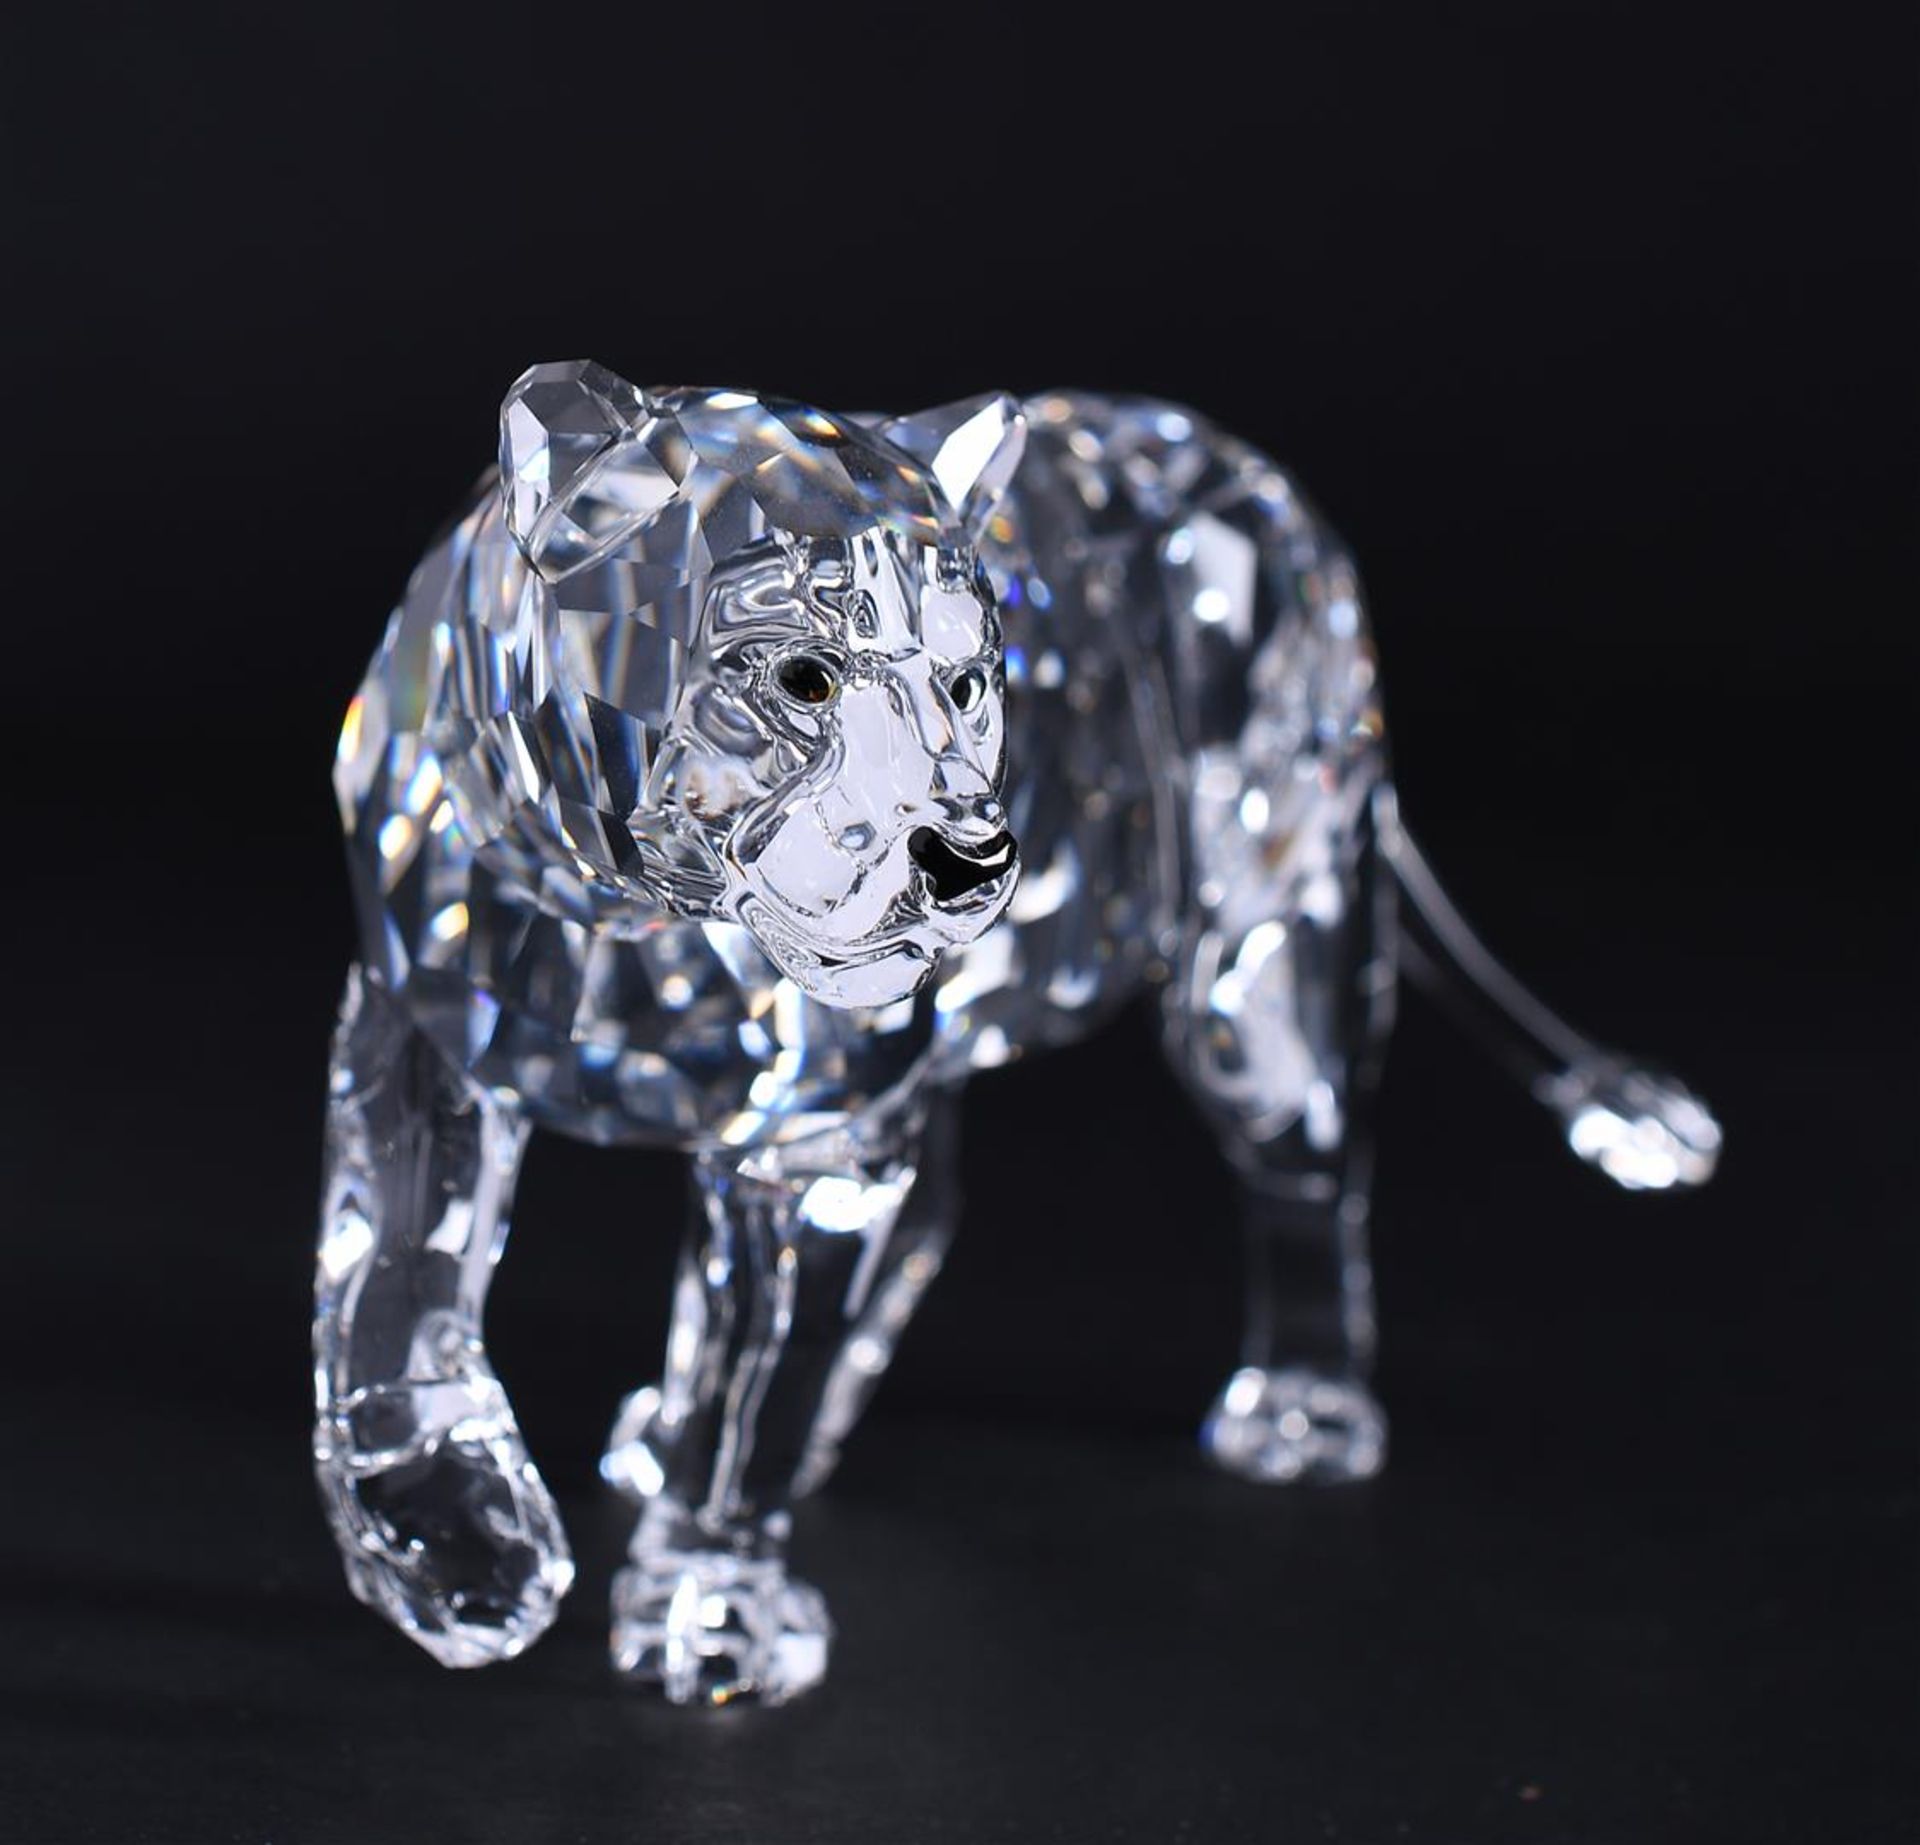 Swarovski, mother lion, year of issue 2013, 1194085. Includes original box.
15,2 x 7,9 cm. - Image 2 of 5